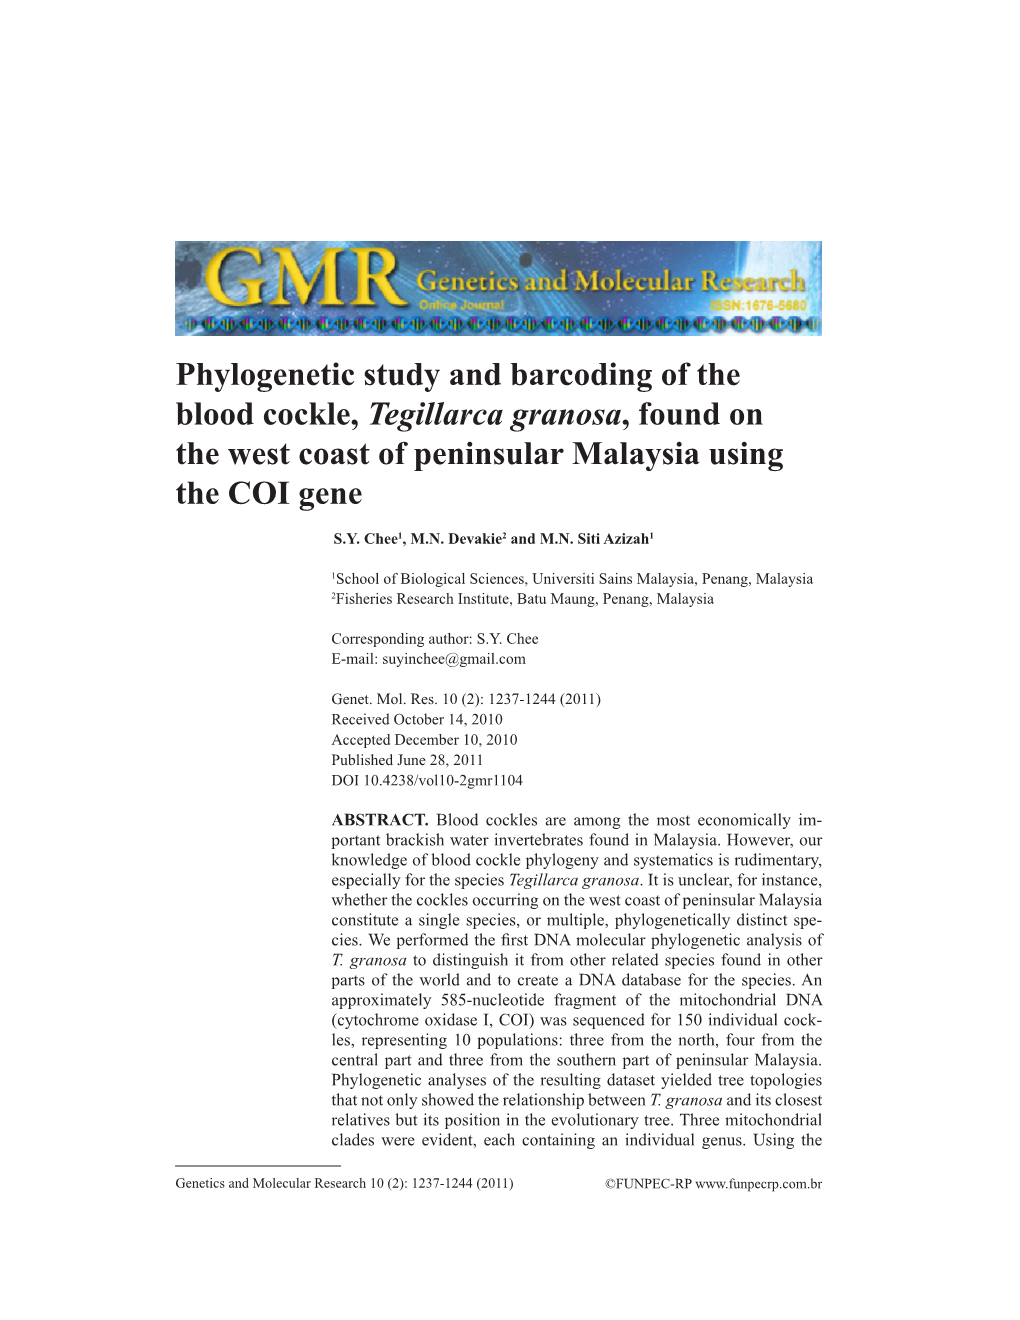 Phylogenetic Study and Barcoding of the Blood Cockle, Tegillarca Granosa, Found on the West Coast of Peninsular Malaysia Using the COI Gene